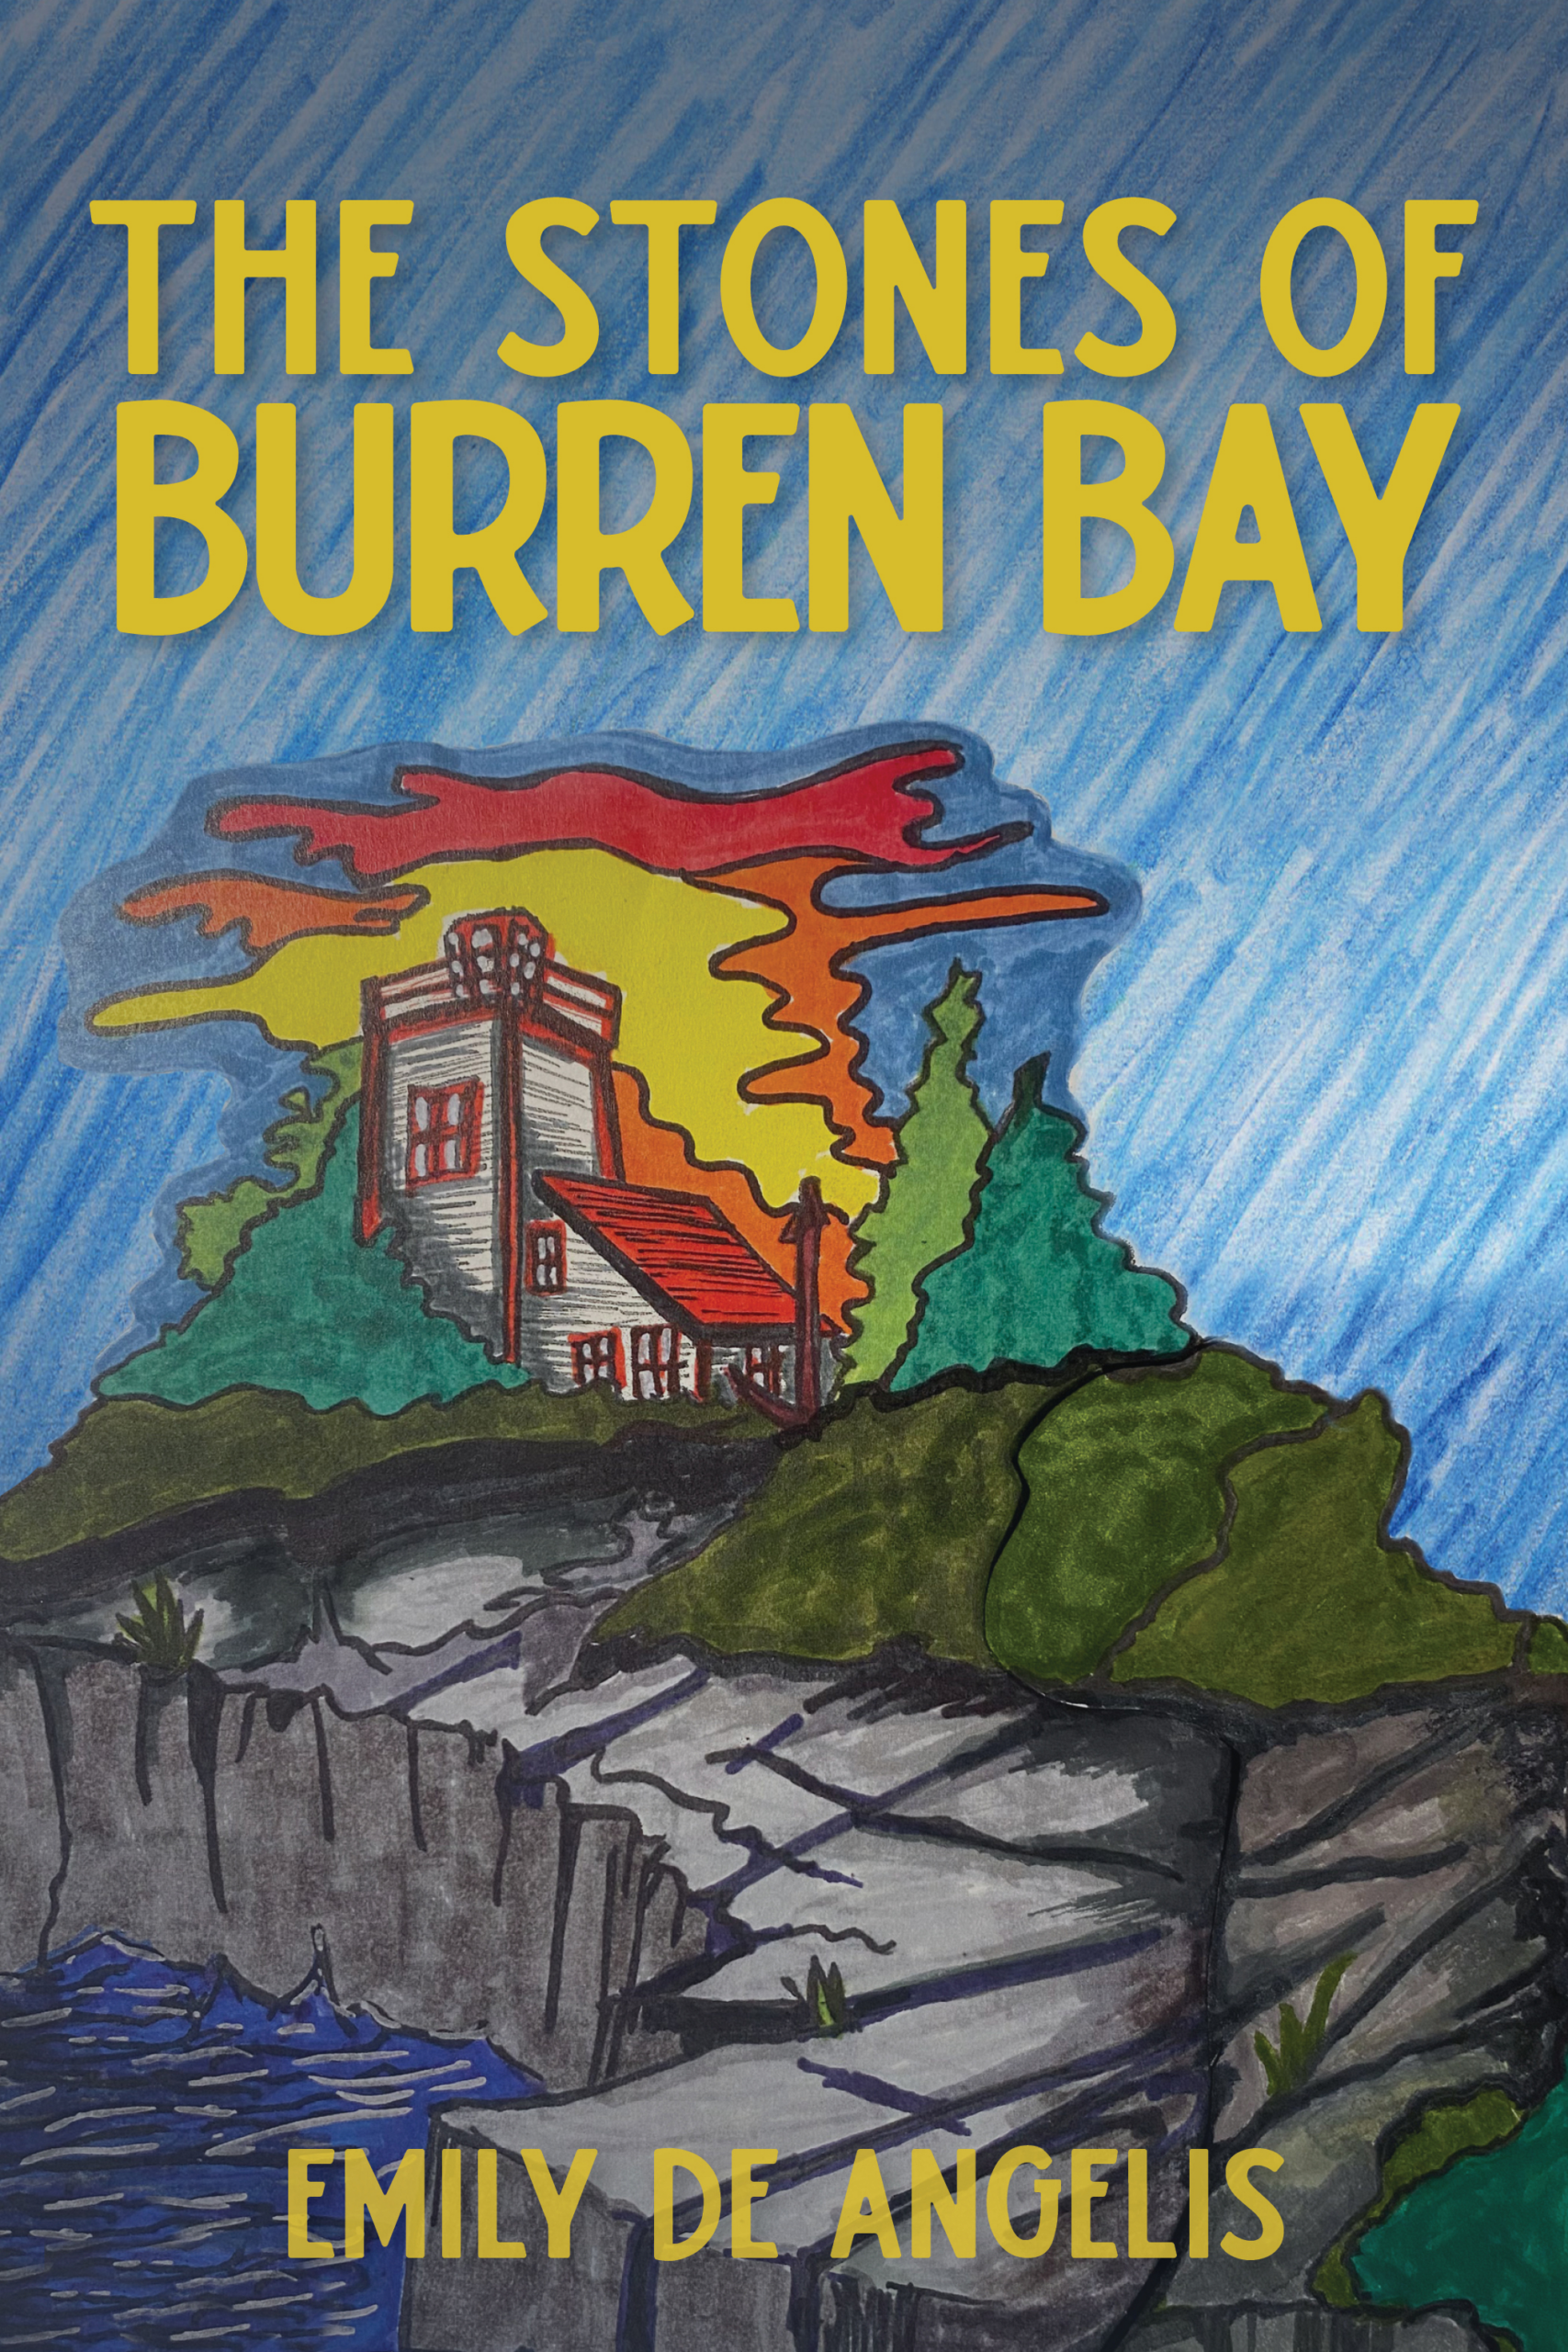 The cover of The Stones of Burren Bay by Emily de Angelis.